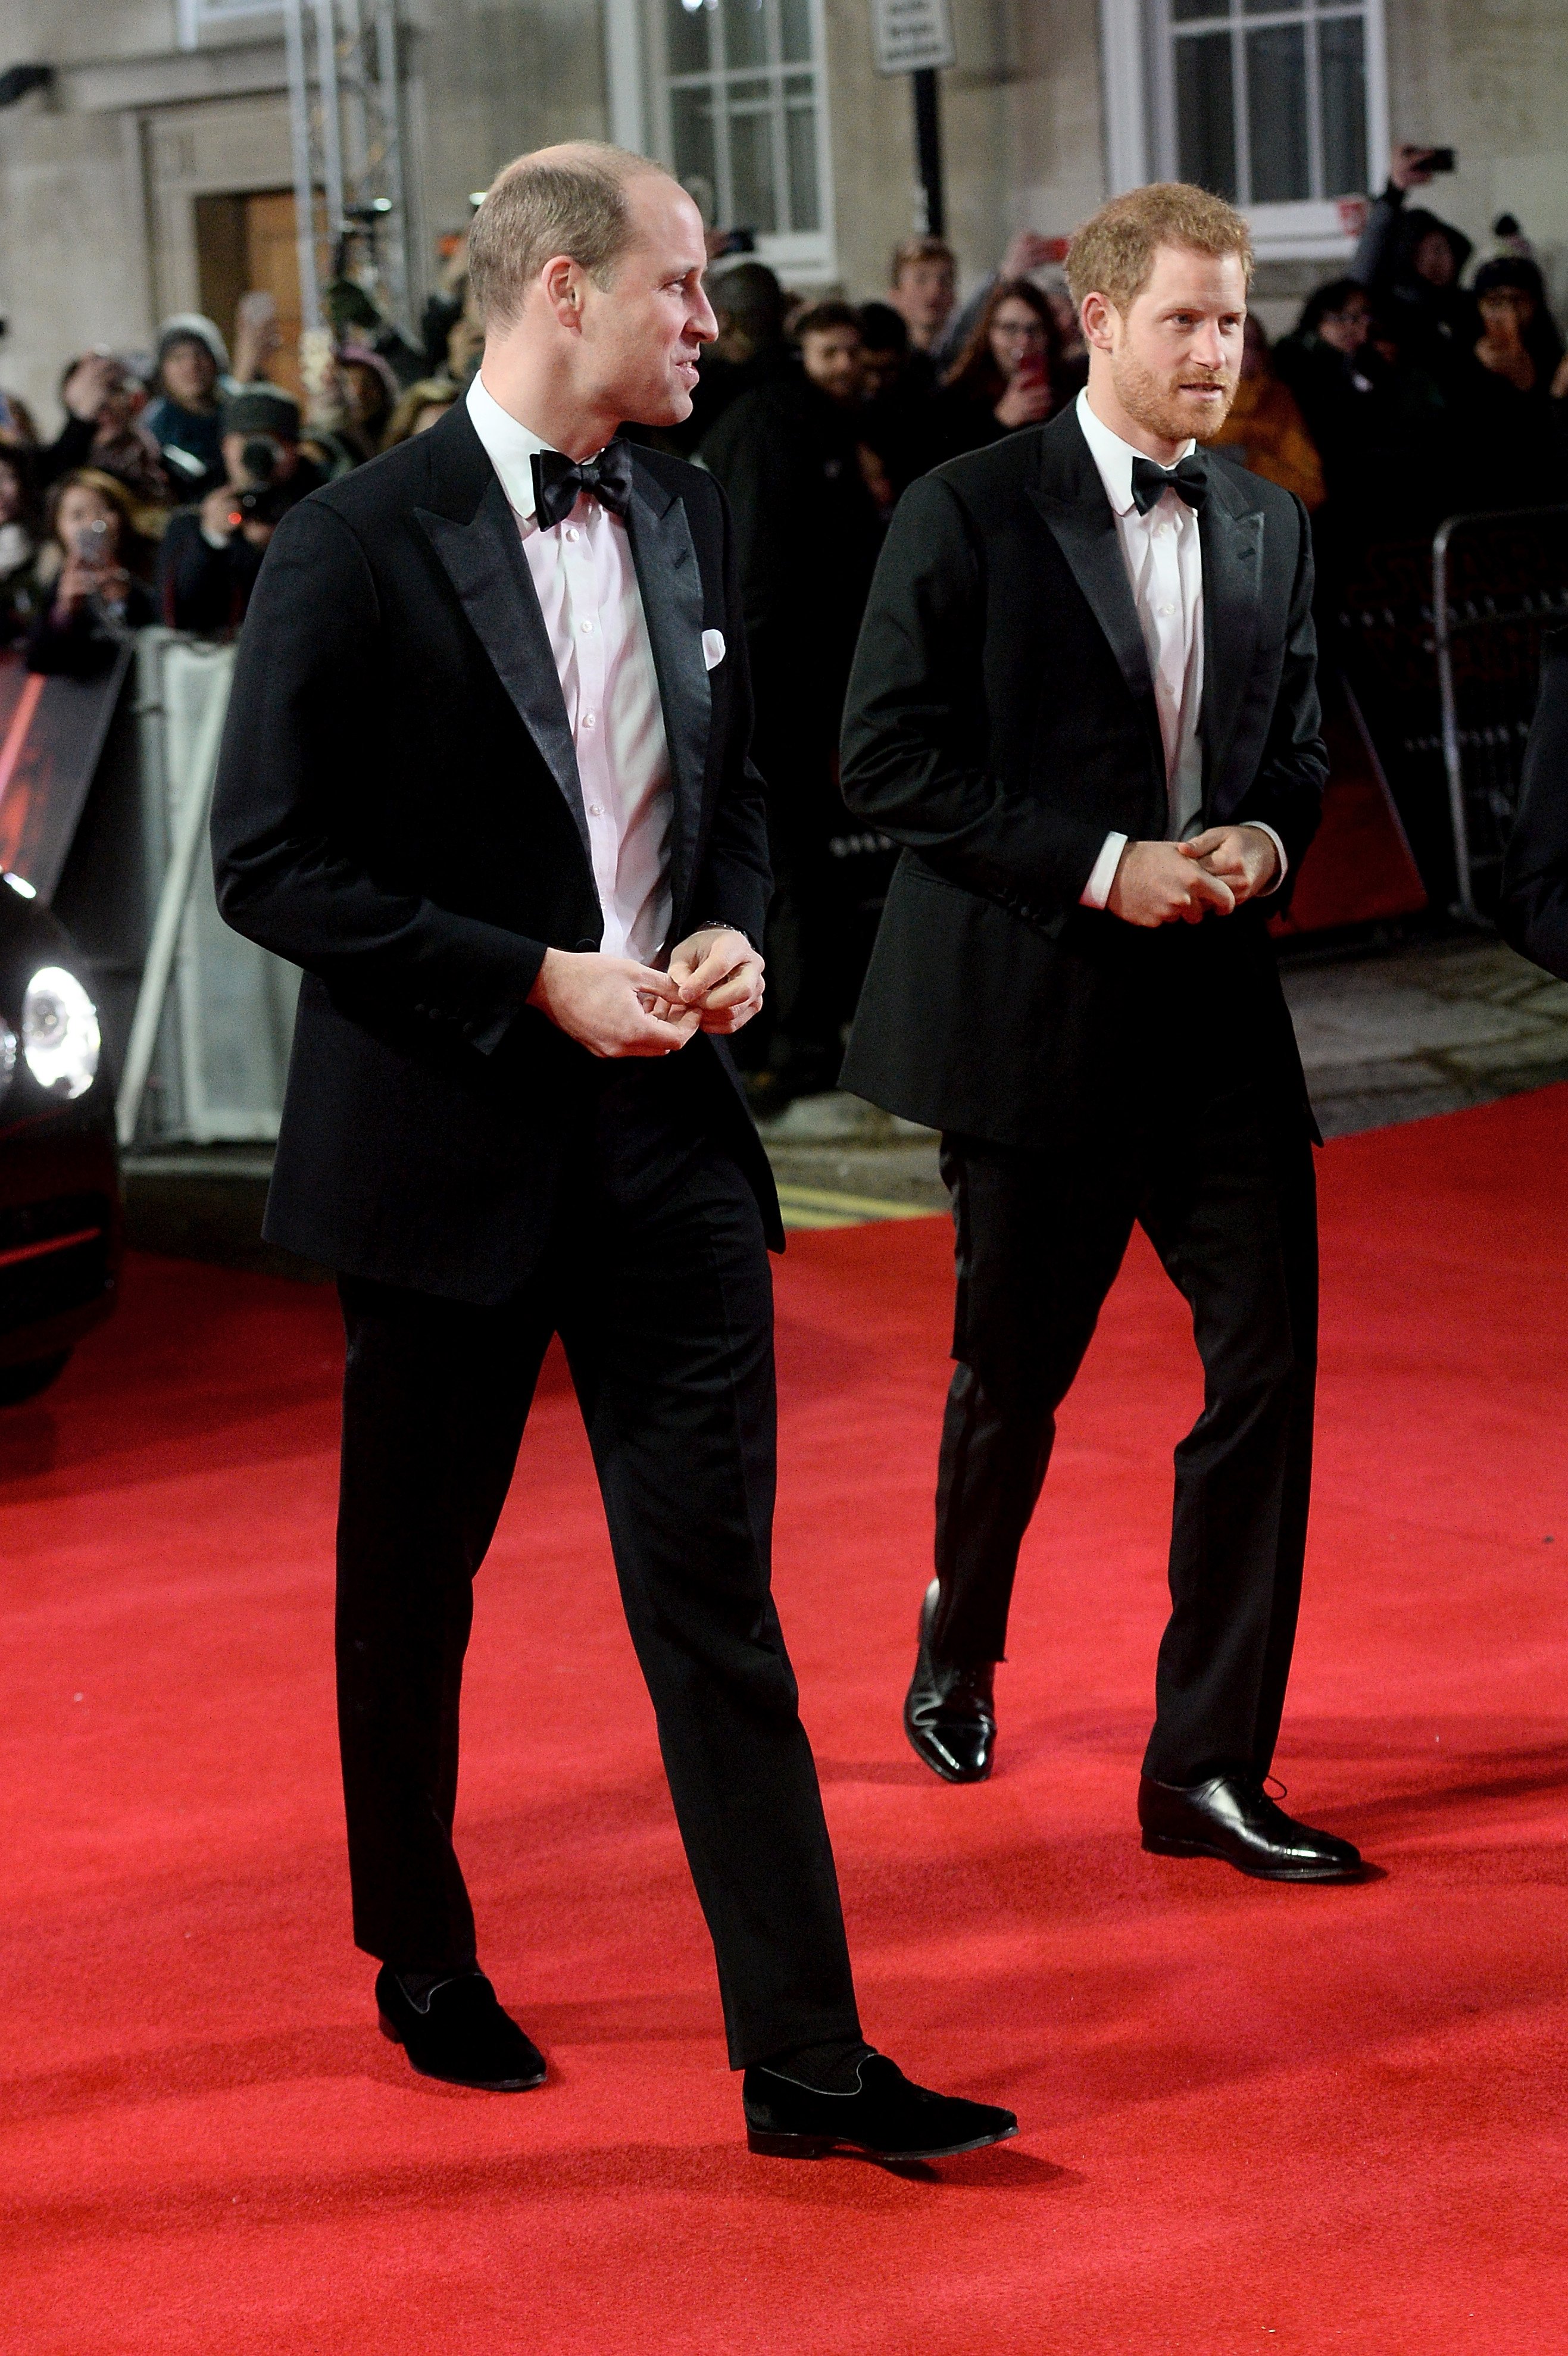 Prince William, the Prince of Wales and Prince Harry at the European Premiere of 'Star Wars' on December 12, 2017 in London, England.  |  Source: Getty Images